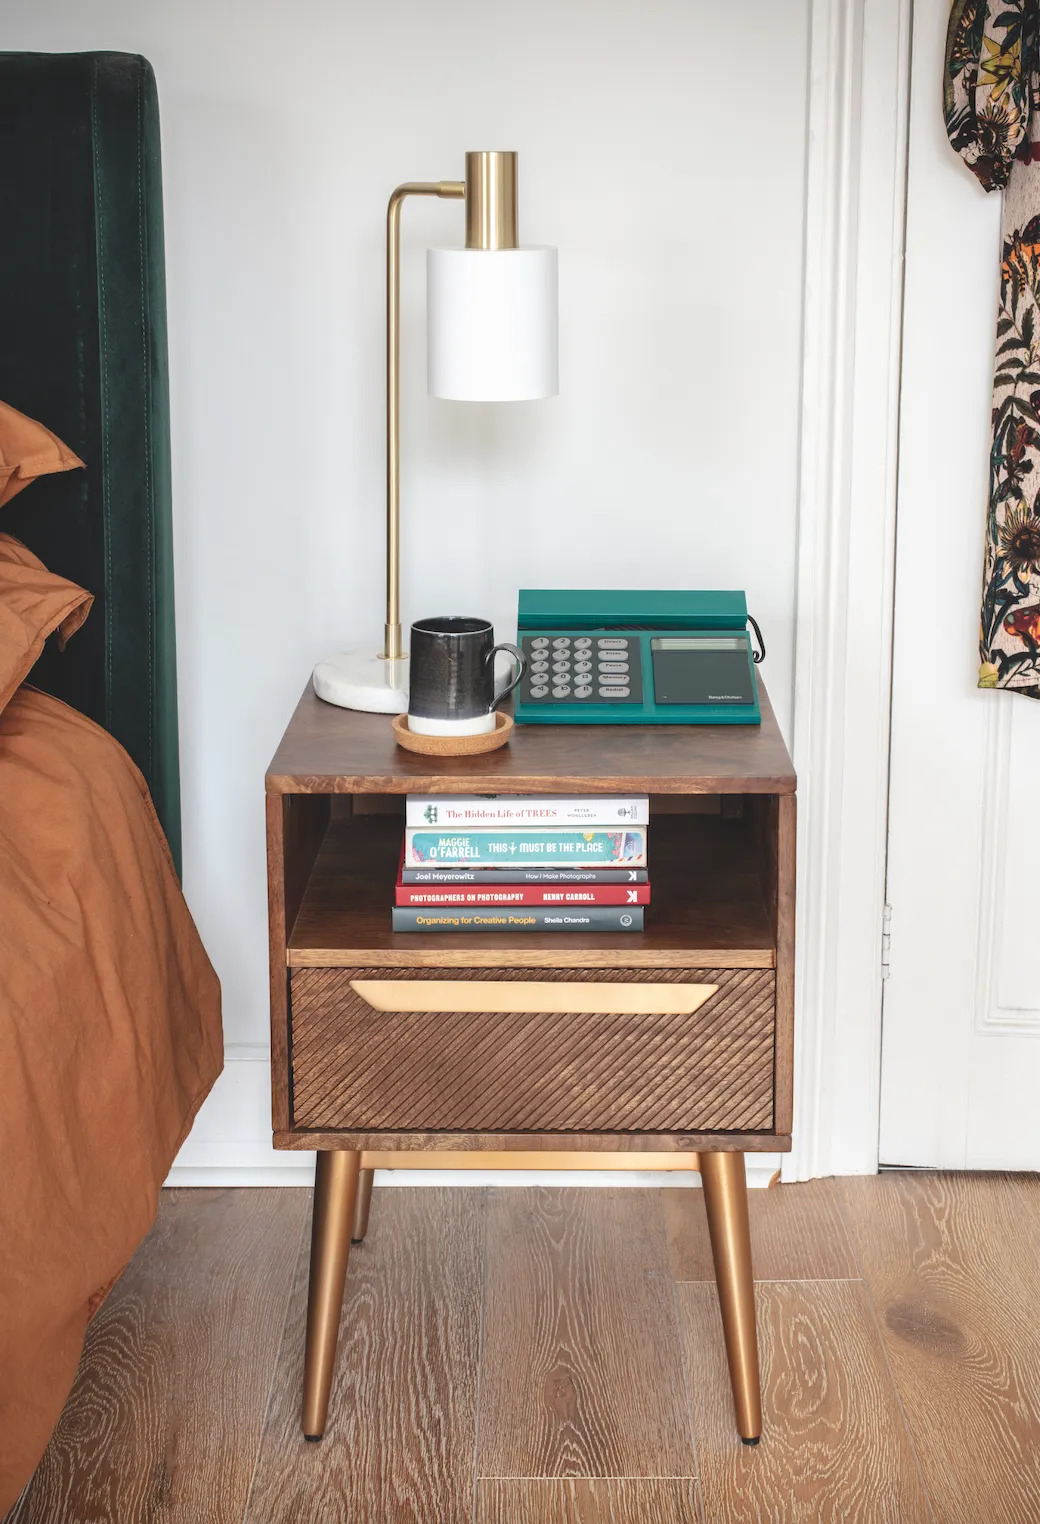 Vintage-look bedside tables are a perfect match for some of Jannine’s special original pieces, like her 1960s telephone. She added white marble and gold lamps to bring a little luxe to the look, as well as soft mood lighting